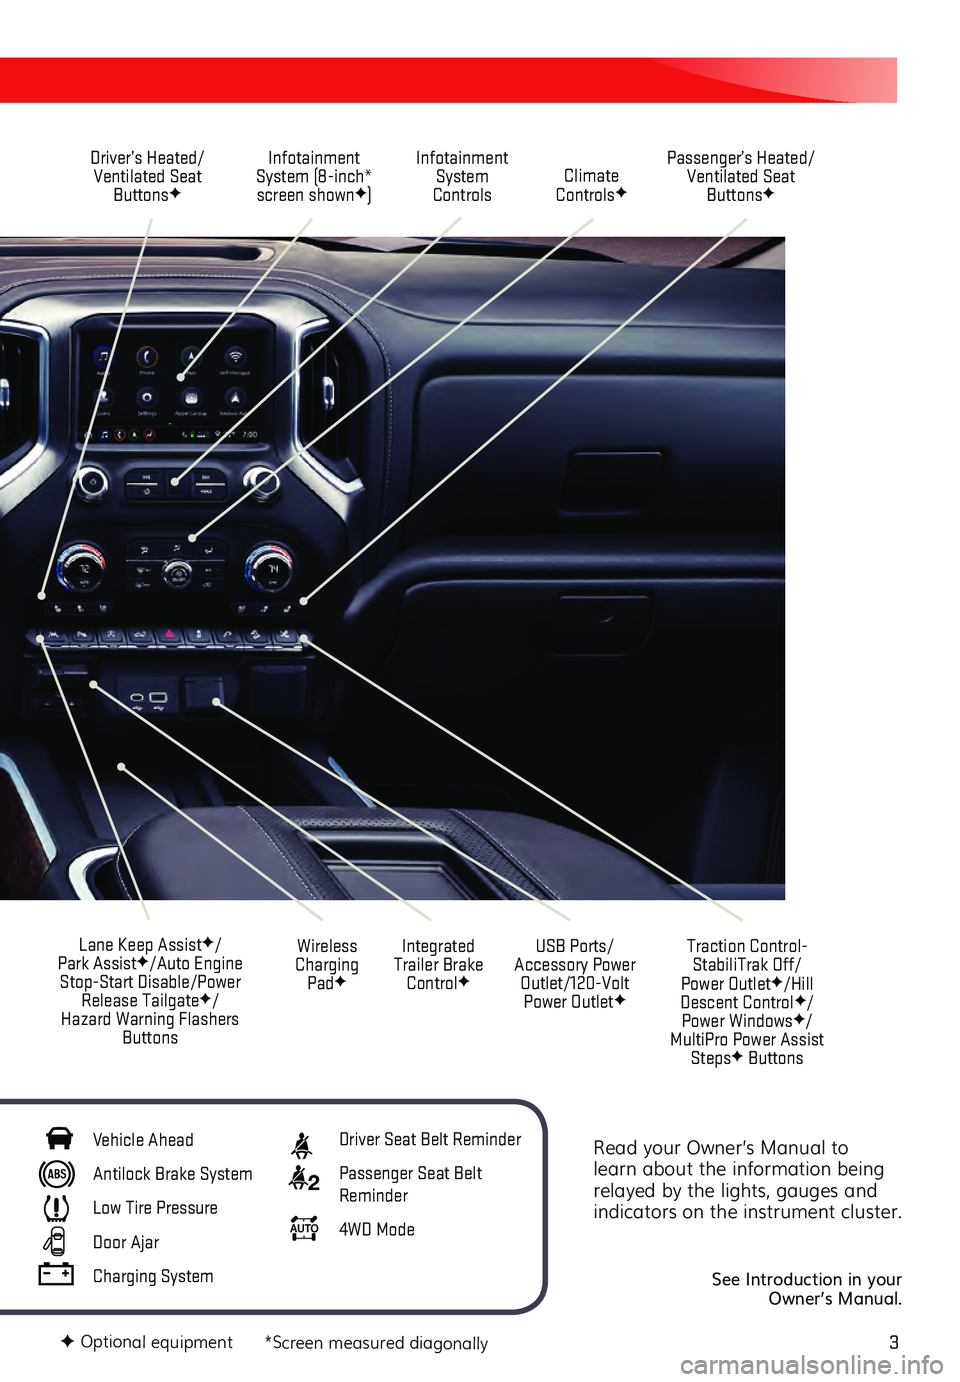 GMC SIERRA 2021  Get To Know Guide 3
Read your Owner’s Manual to 
learn about the information being 
relayed by the lights, gauges and 
indicators on the instrument cluster.
 
See Introduction in your 
Owner’s Manual.
Driver’s He